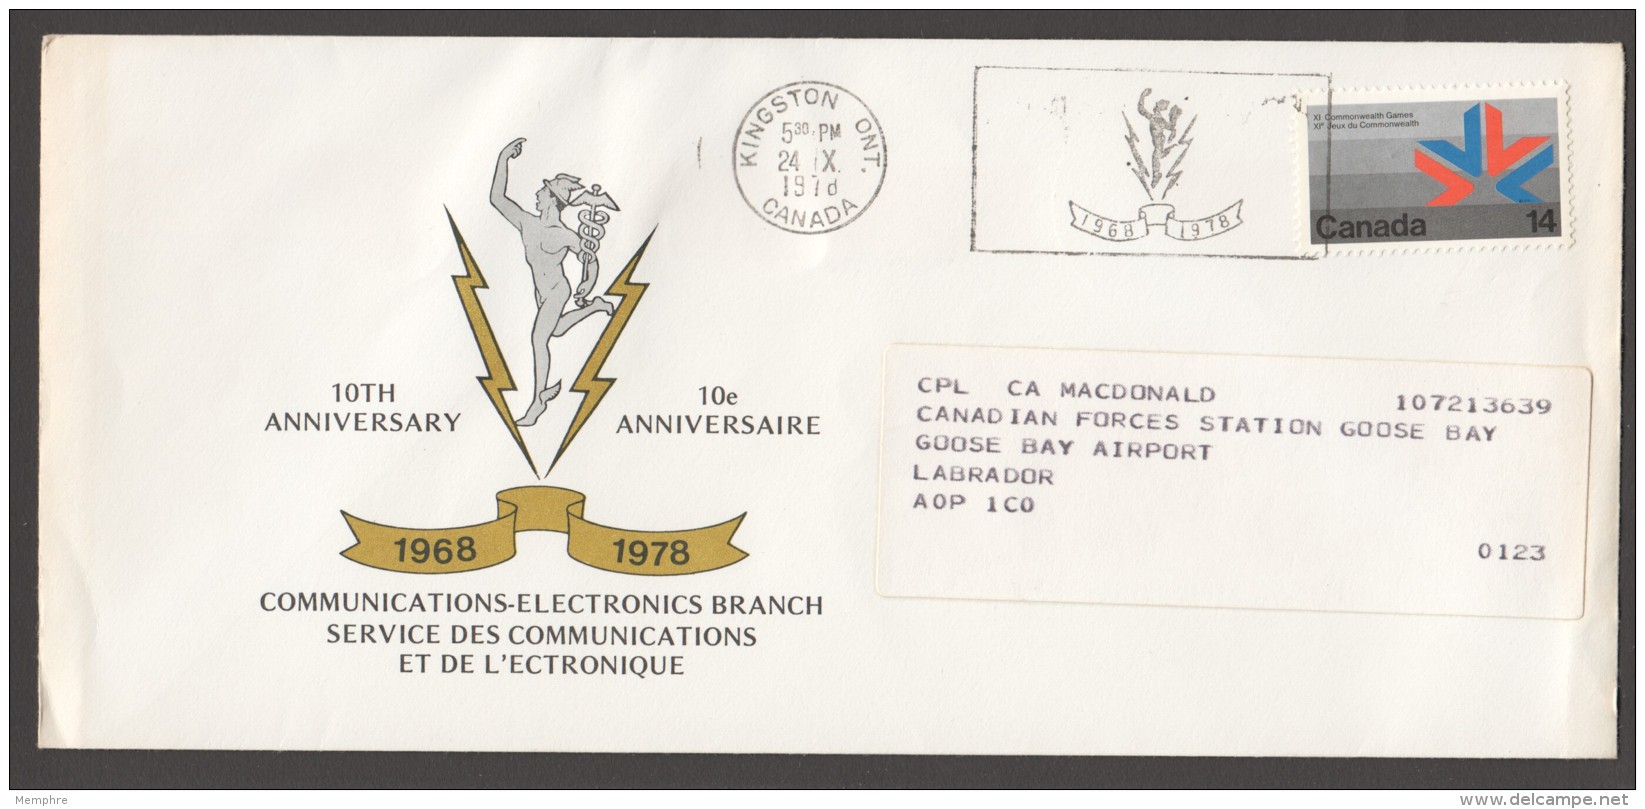 MILITARY -  Canadian Forces Communication-Electronic Branch - Special Cancel - Commemorative Covers